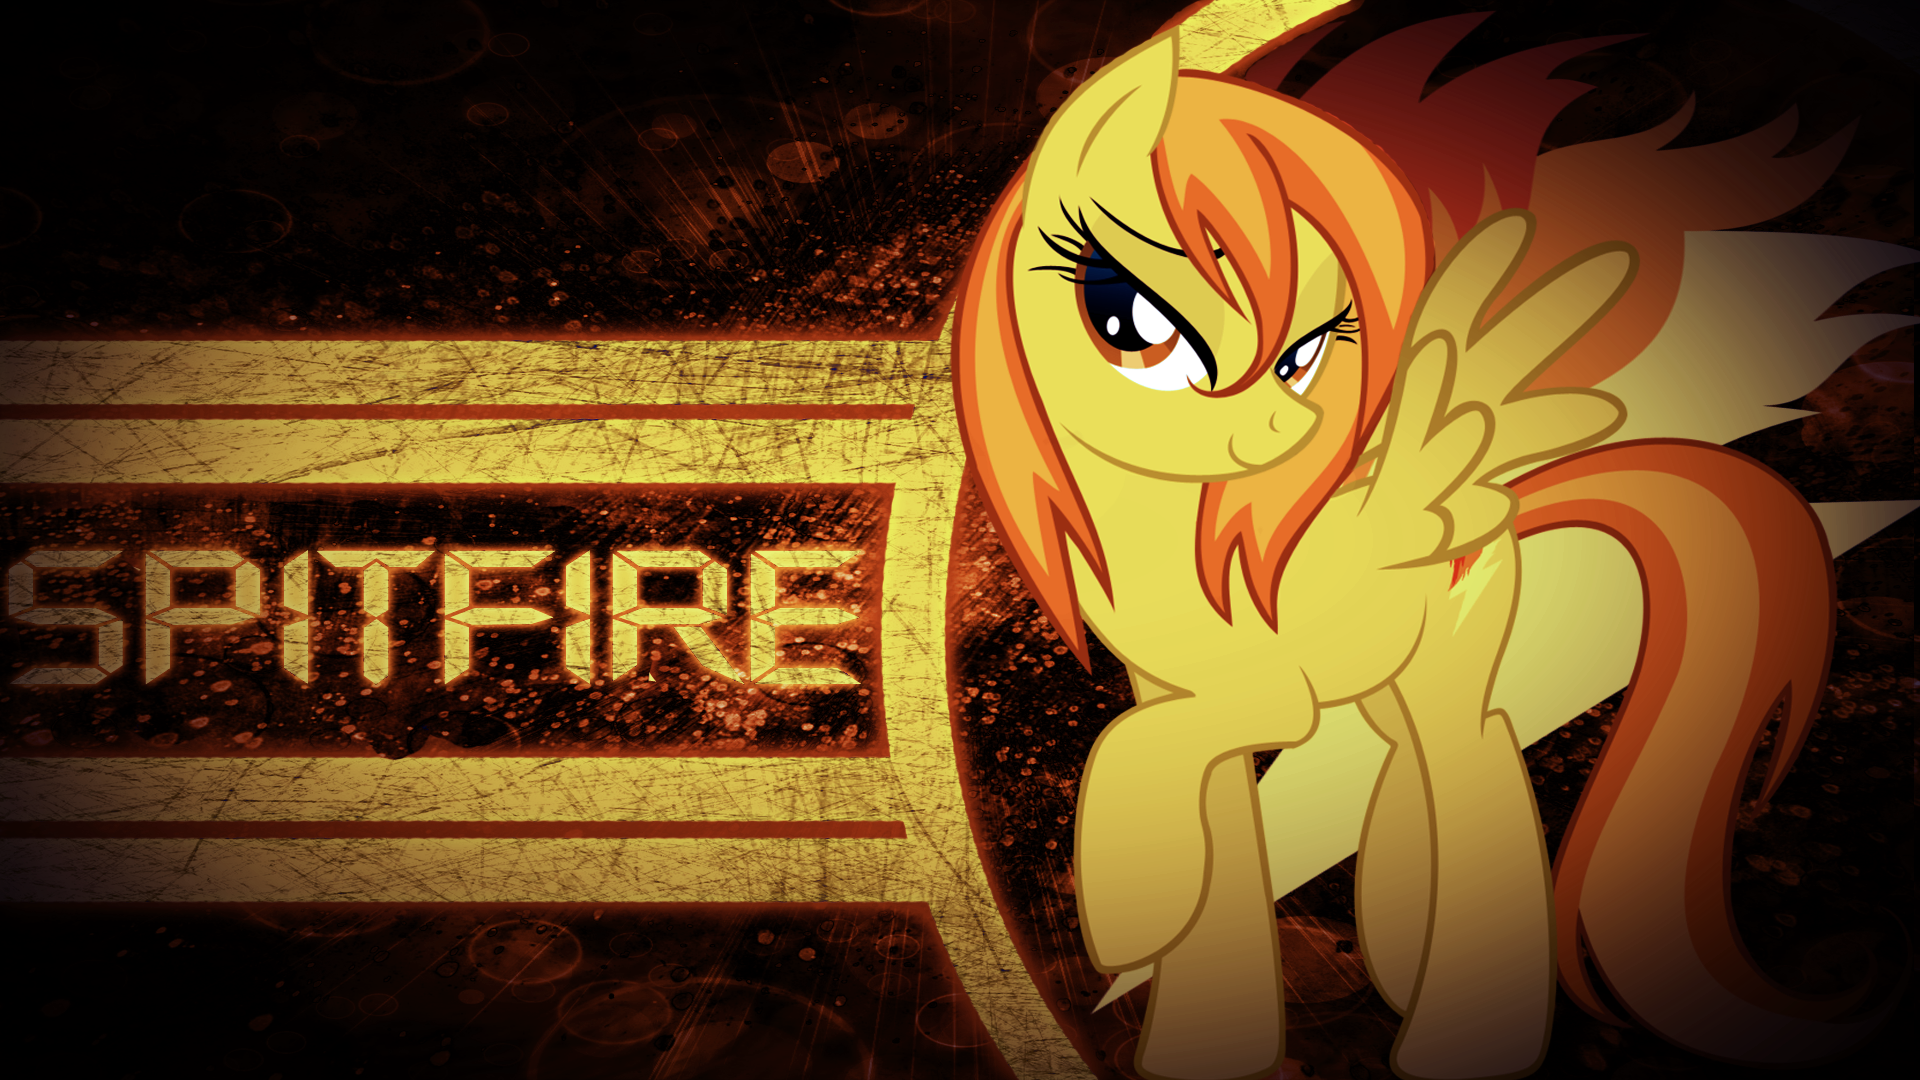 Spitfire - Wallpaper by JAVE-the-13 on DeviantArt